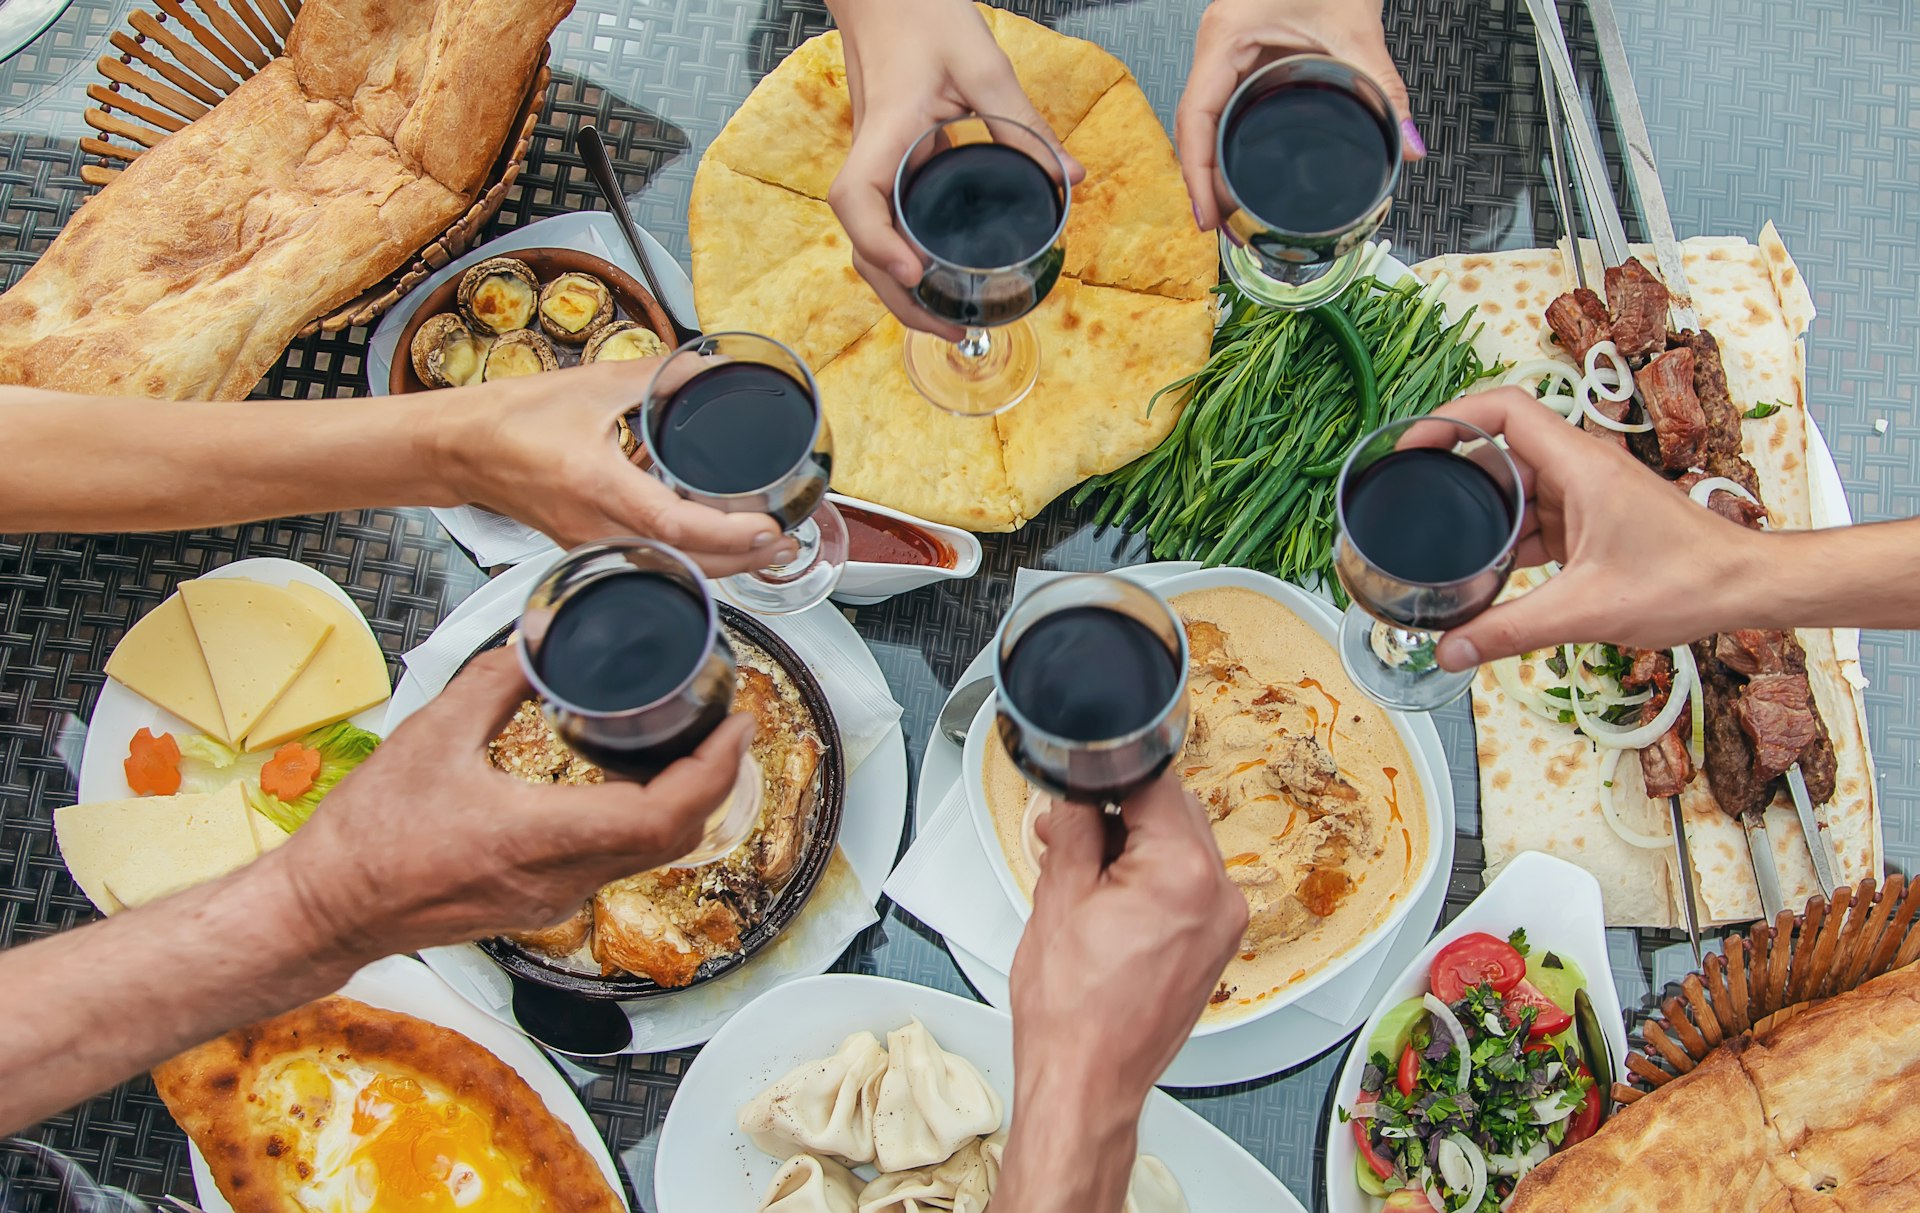 Six people raise a toast with glasses of red wine over a table laid with many different traditional Georgian dishes